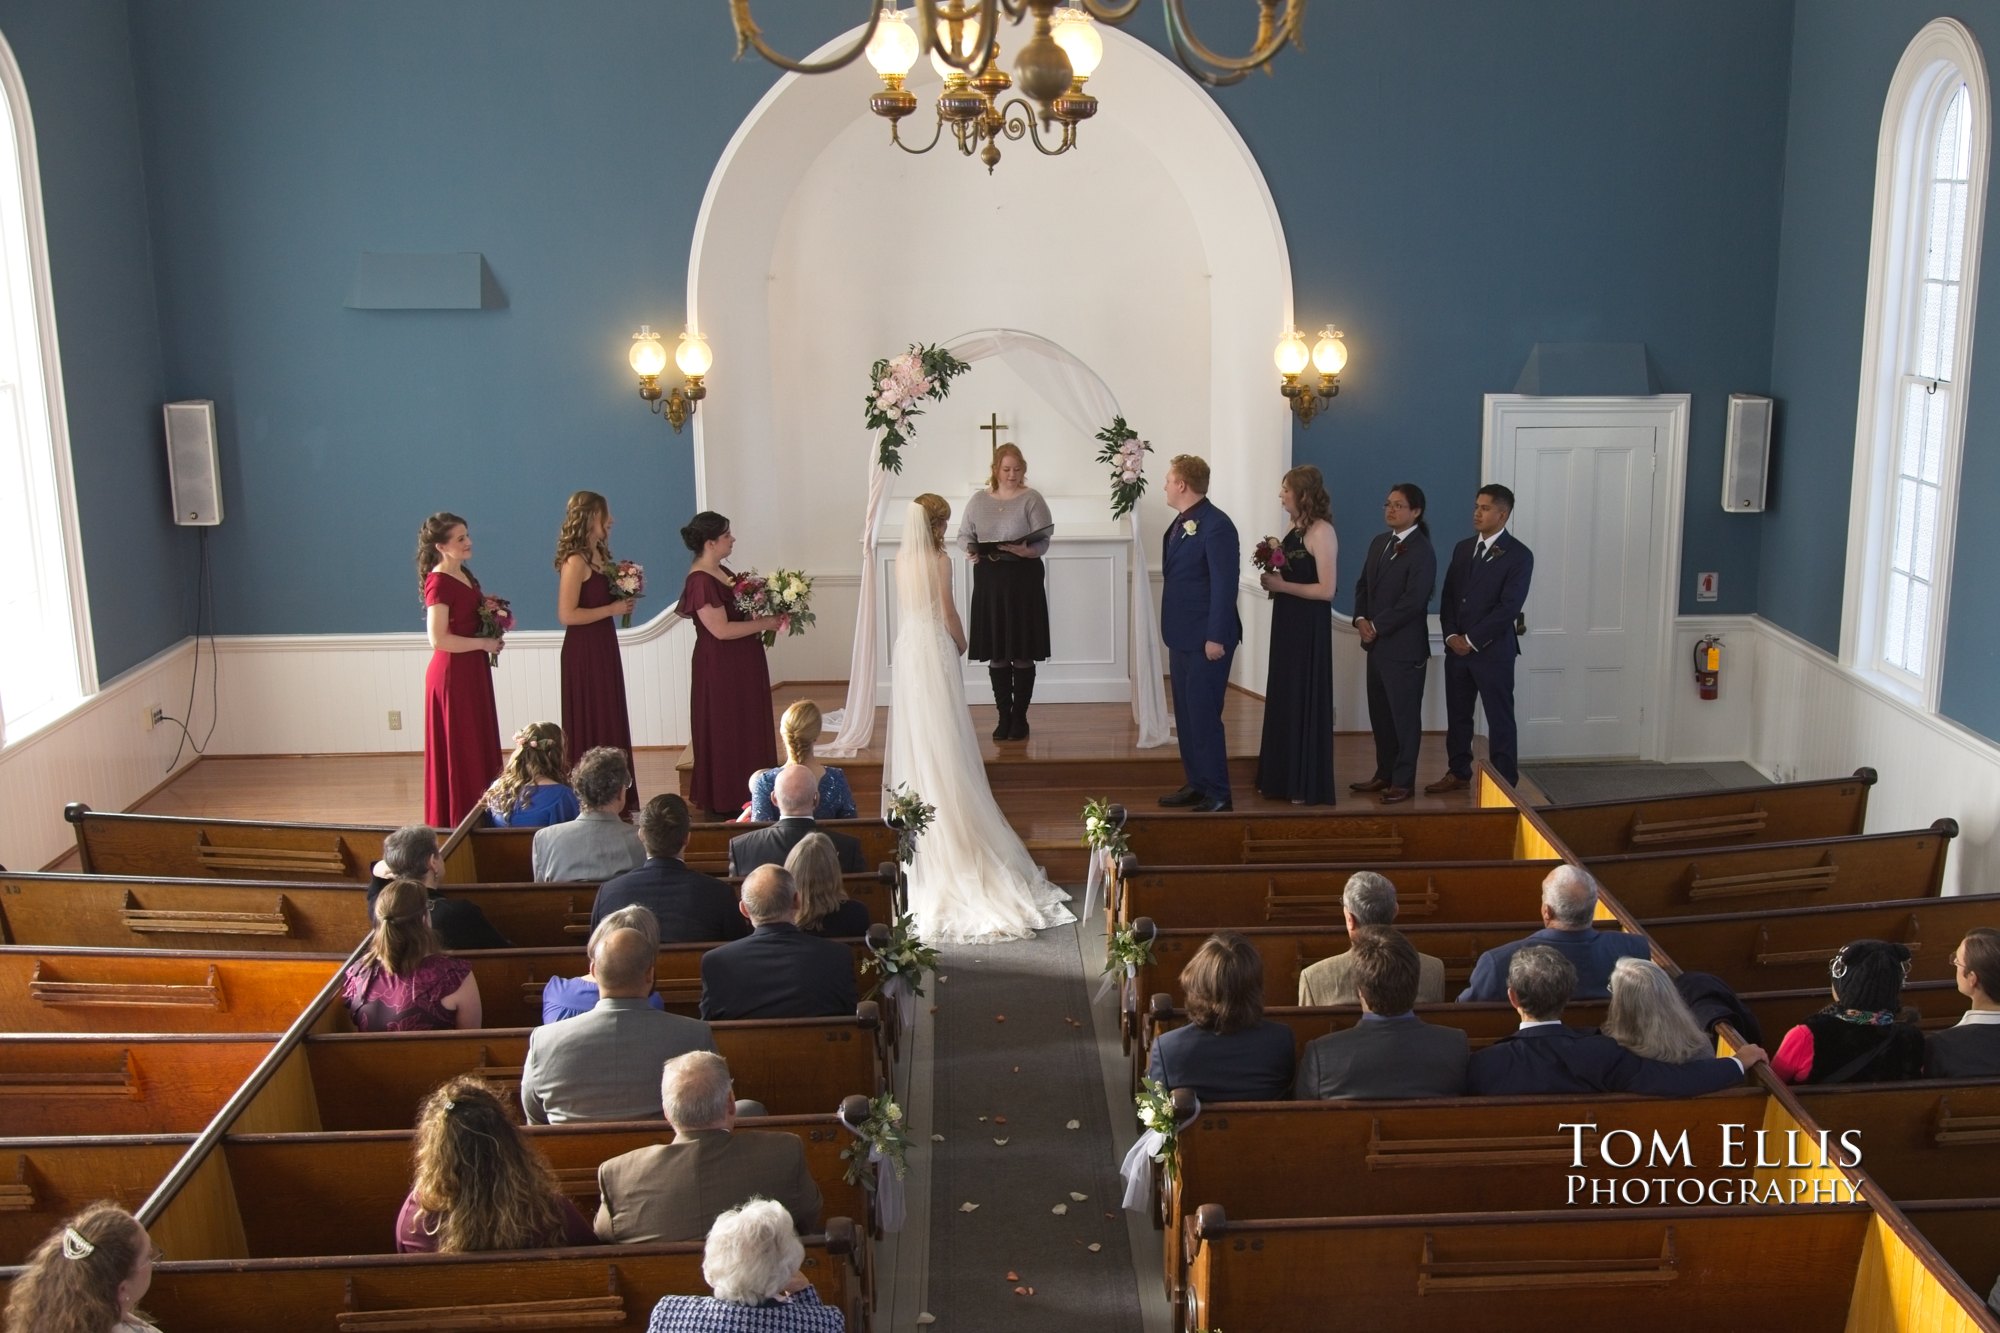 Nik and Brian weere married at St Paul's Church in Port Gamble. Tom Ellis Photography, Destination Wedding Photographer